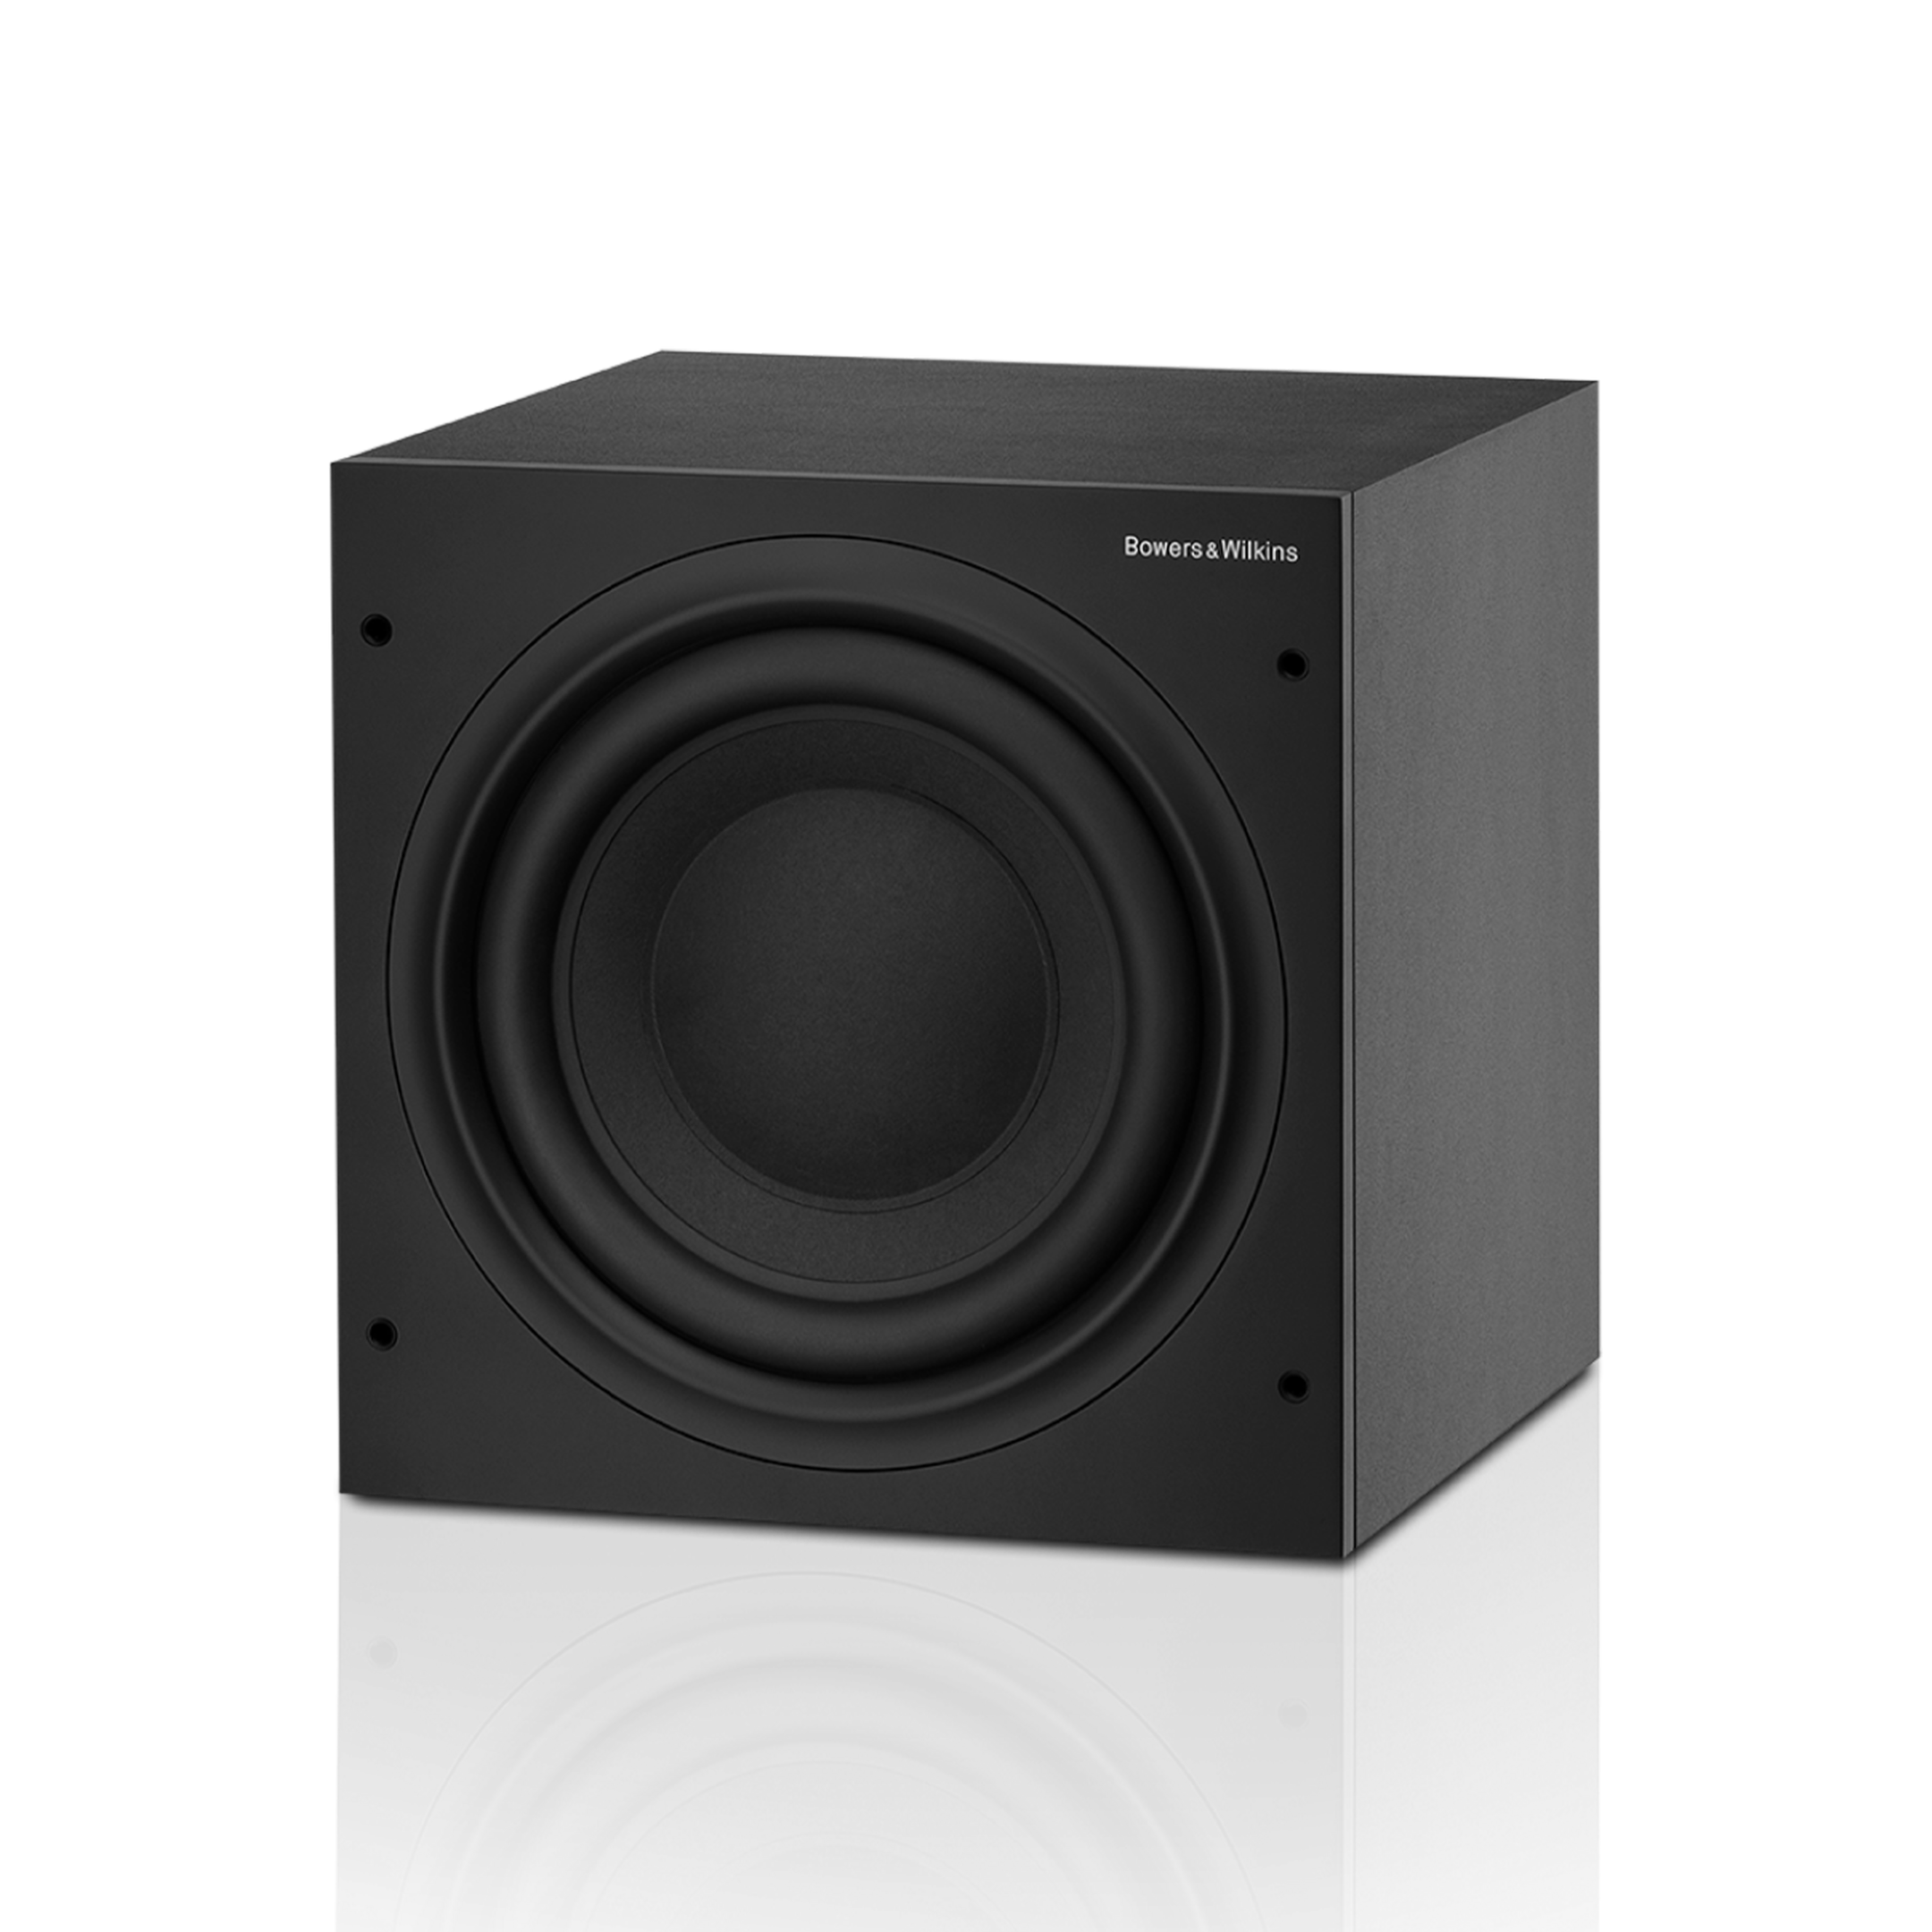 Bowers & Wilkins ASW610XP - 10" 500W Active Subwoofer (Certified Refurbished)